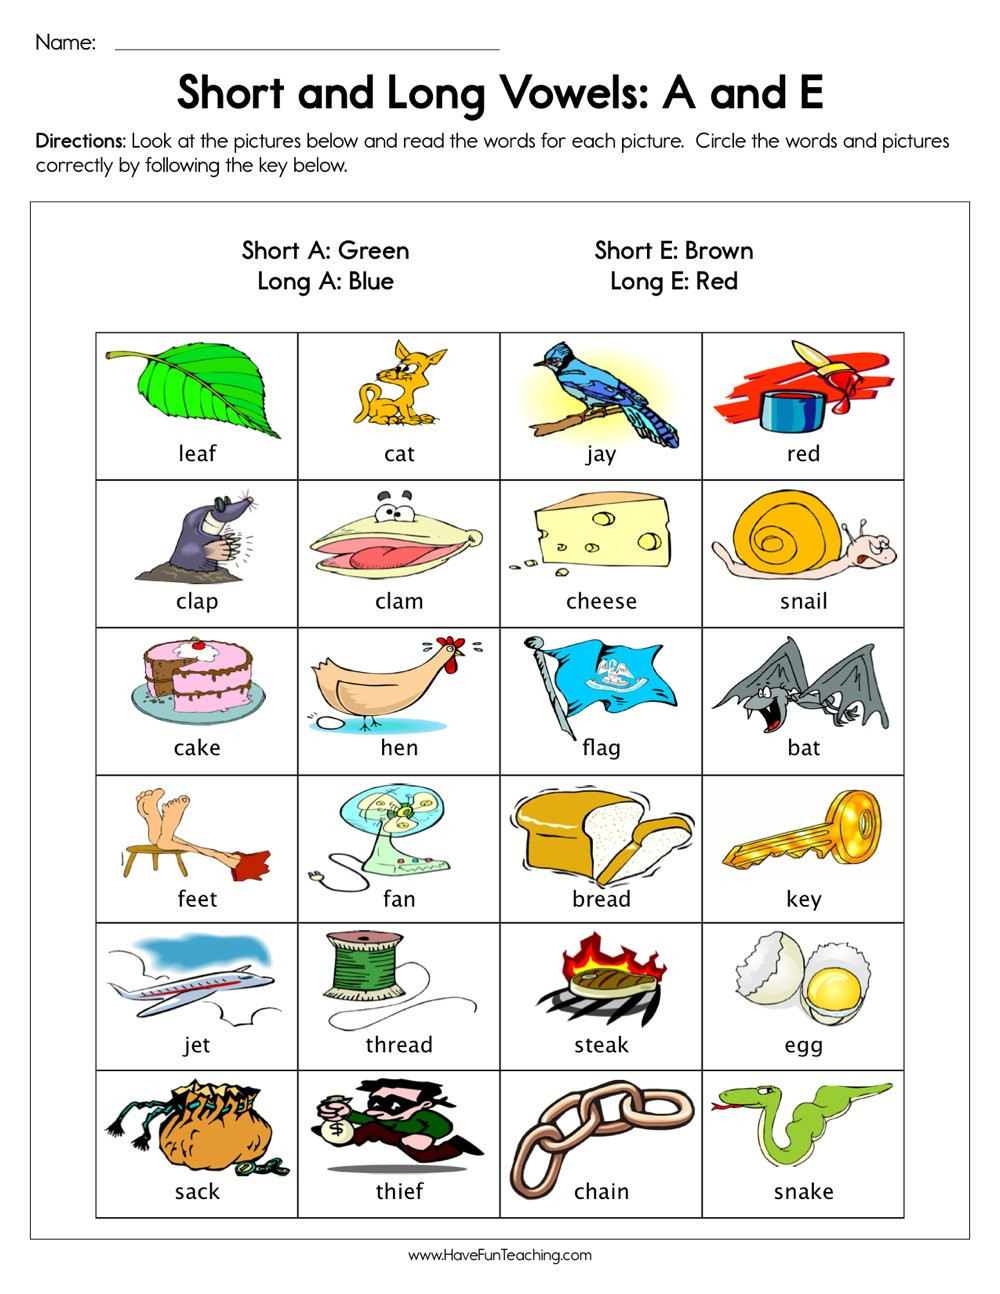 Short and Long Vowel Worksheet Short and Long Vowels A and E Worksheet